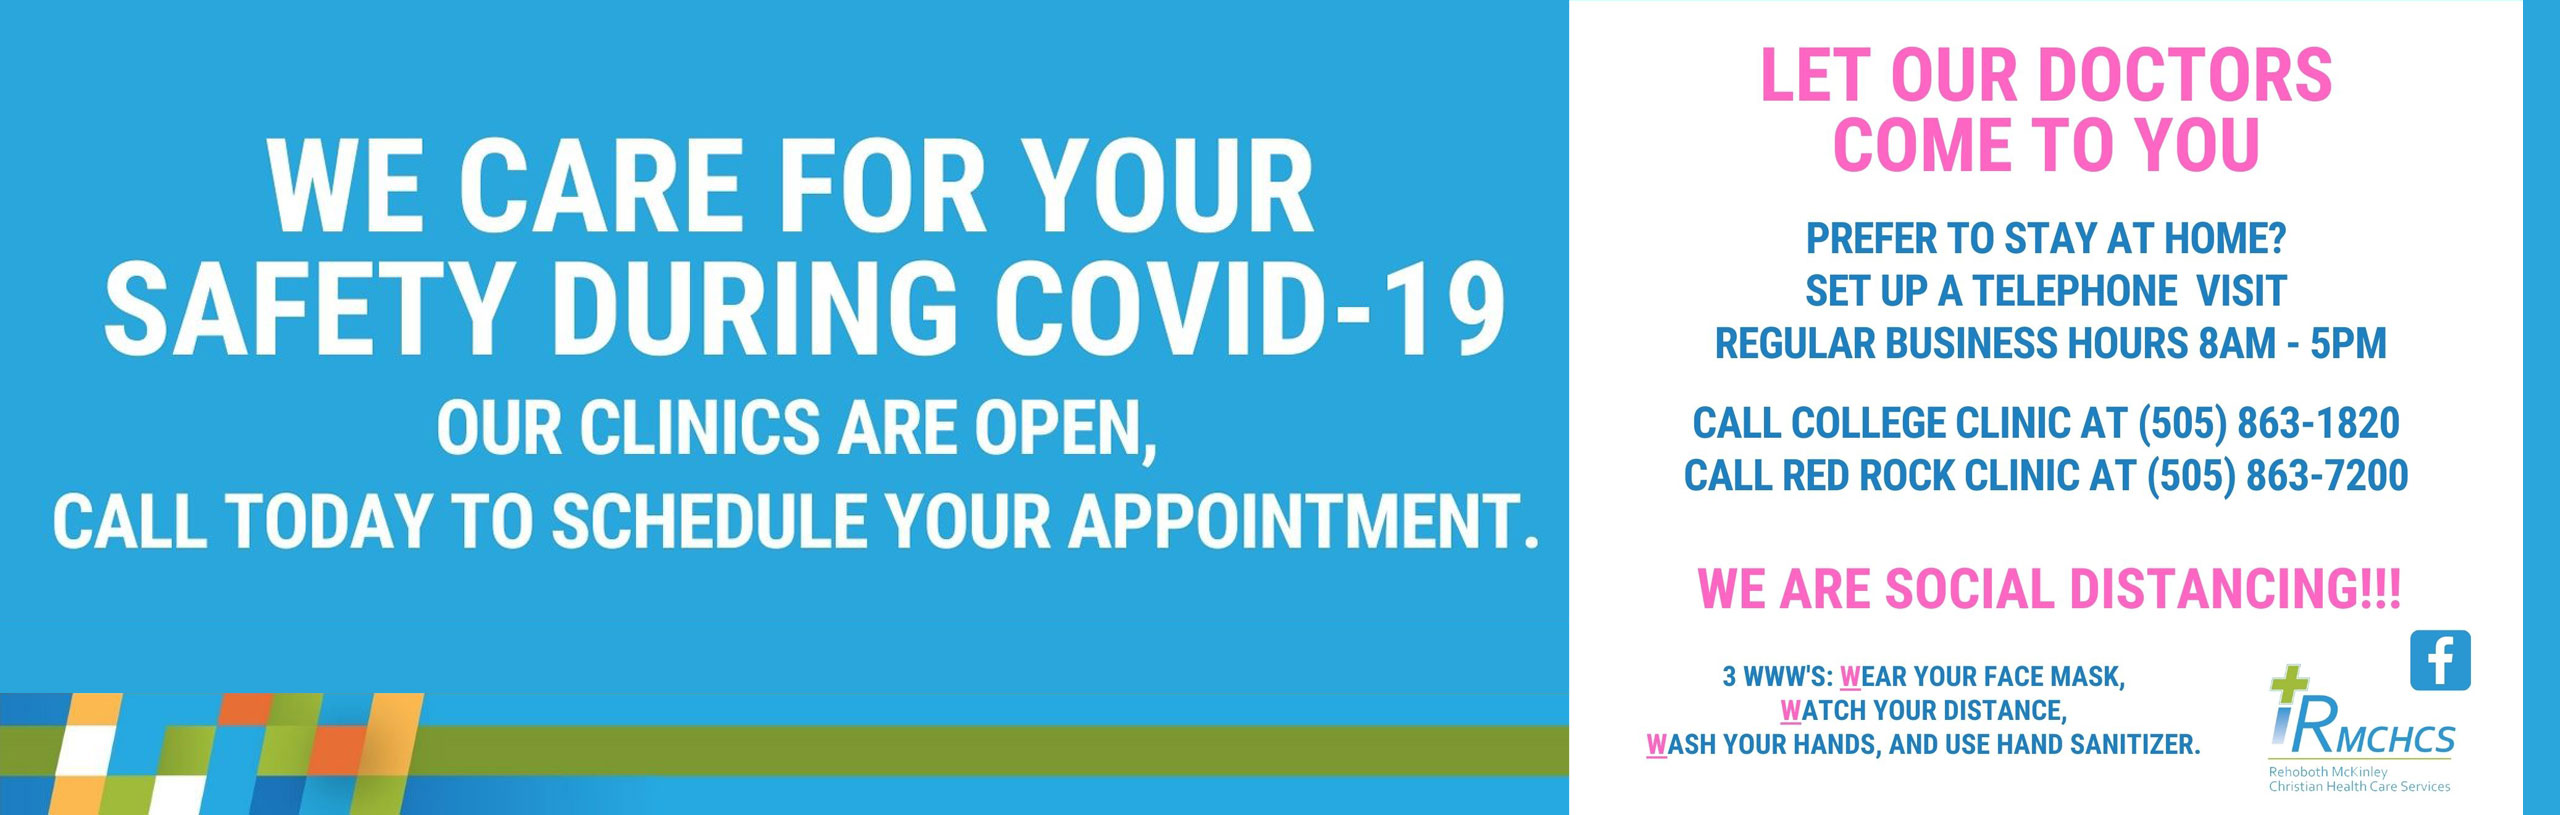 Banner that says:

WE CARE FOR YOUR SAFETY DURING COVID-19
OUR CLINICS ARE OPEN, CALL TODAY TO SCHEDULE YOUR APPOINTMENT.

LET OUR DOCTOR COME TO YOU
PREFER TO STAY AT HOME?
SET UP A TELEPHONE VISIT
REGULAR BUSINESS HOURS 8AM-5PM

CALL COLLEGE CLNIC AT (505) 863-1820
CALL RED ROCK CLINIC AT (505)863-7200

WE ARE SOCIAL DISTANCING!!!

3 WWWW'S: WEAR YOUR FACE MASK, WATCH YOUT DISTANCE, WASH YOUR HANDS, AND USE HAND SANITIZIER